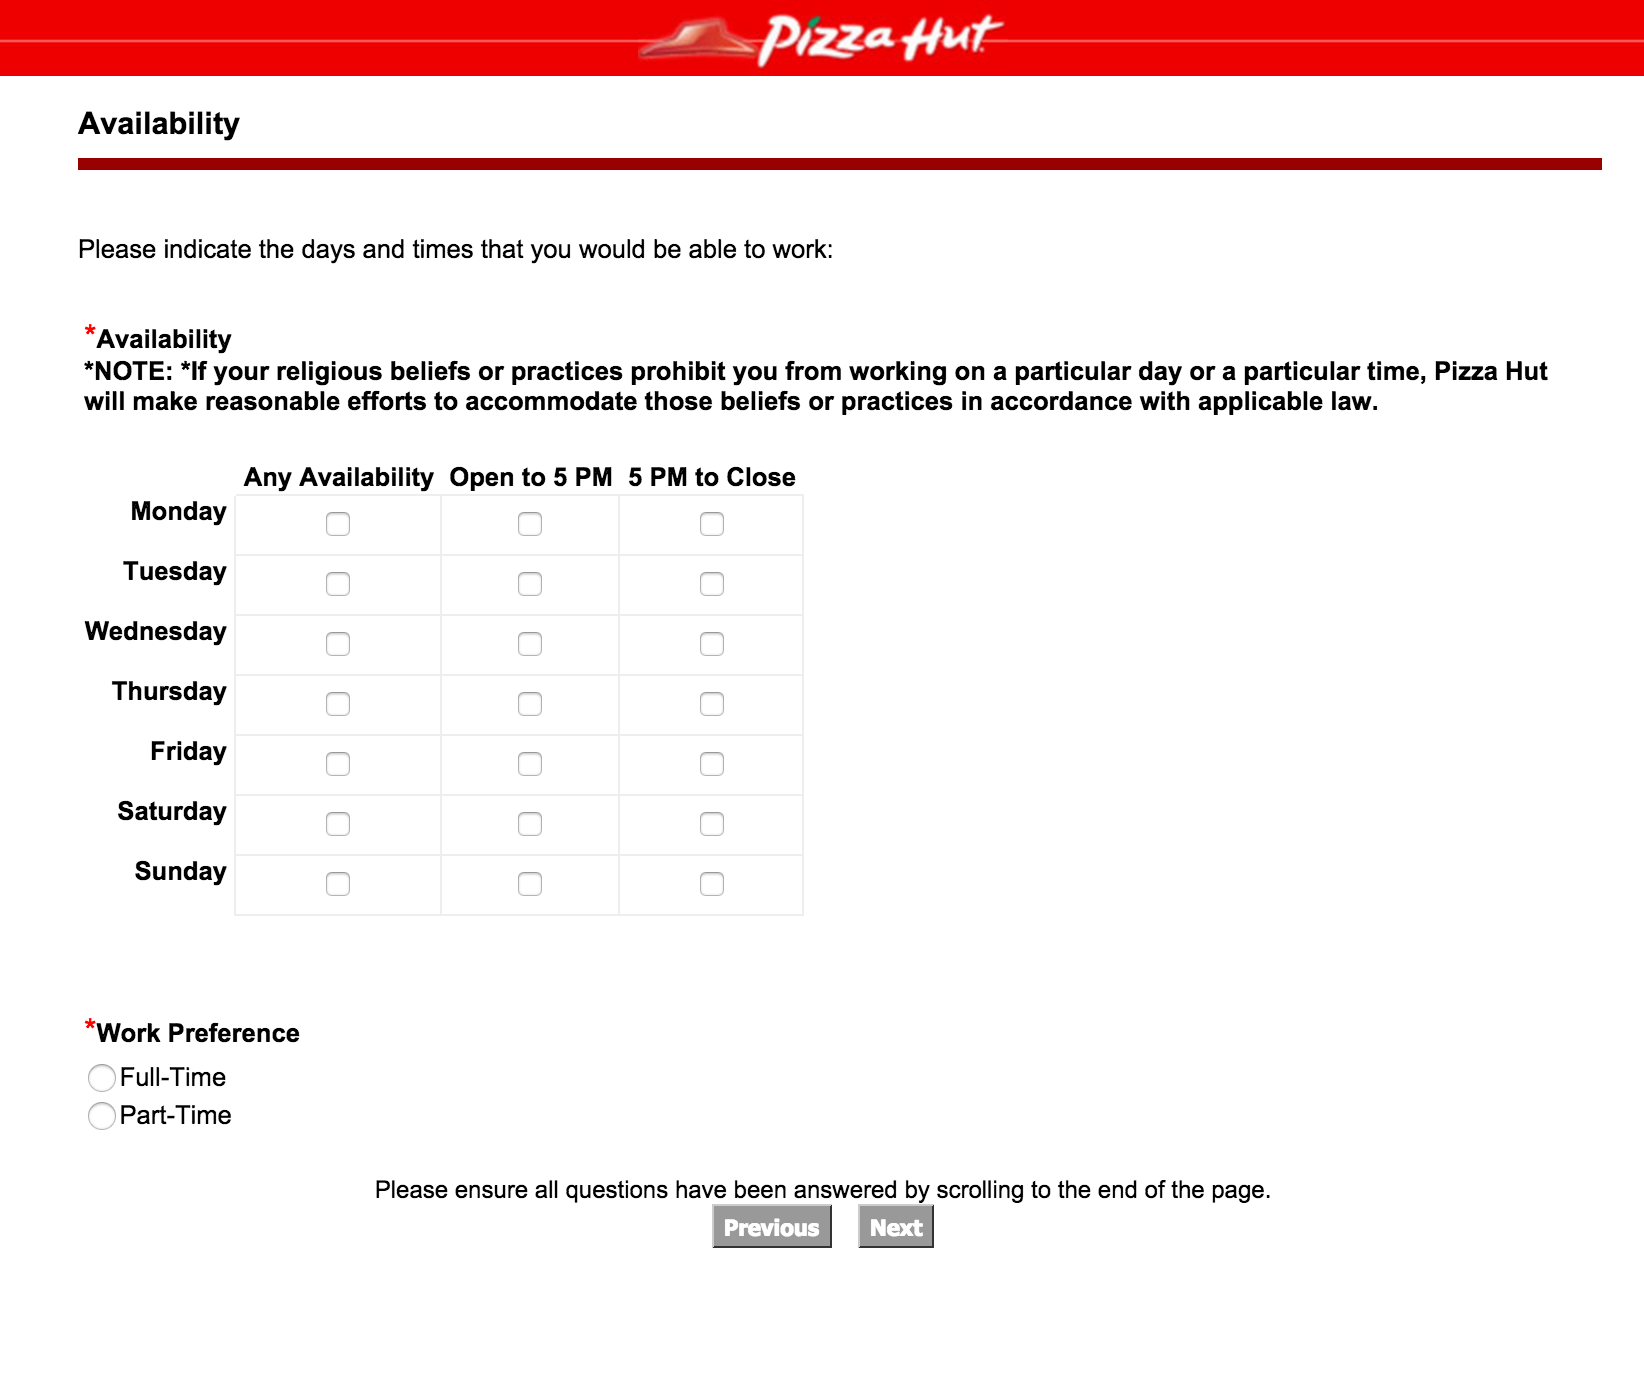 Apply for a part time job at pizza hut